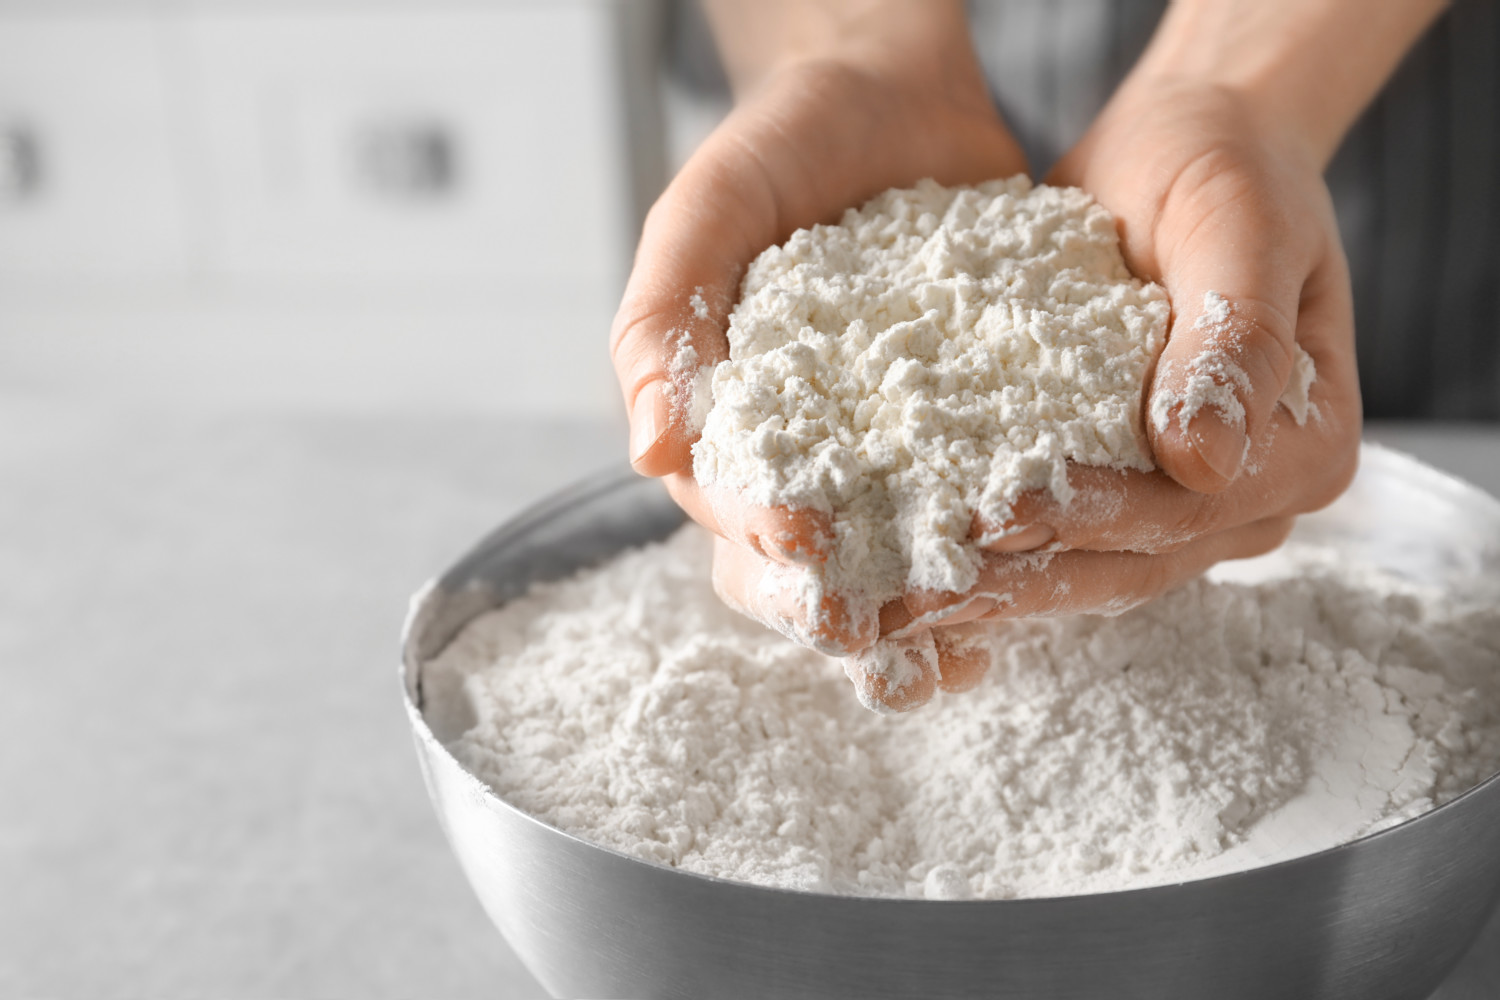 Can you eat raw flour? It's a bad idea for several reasons